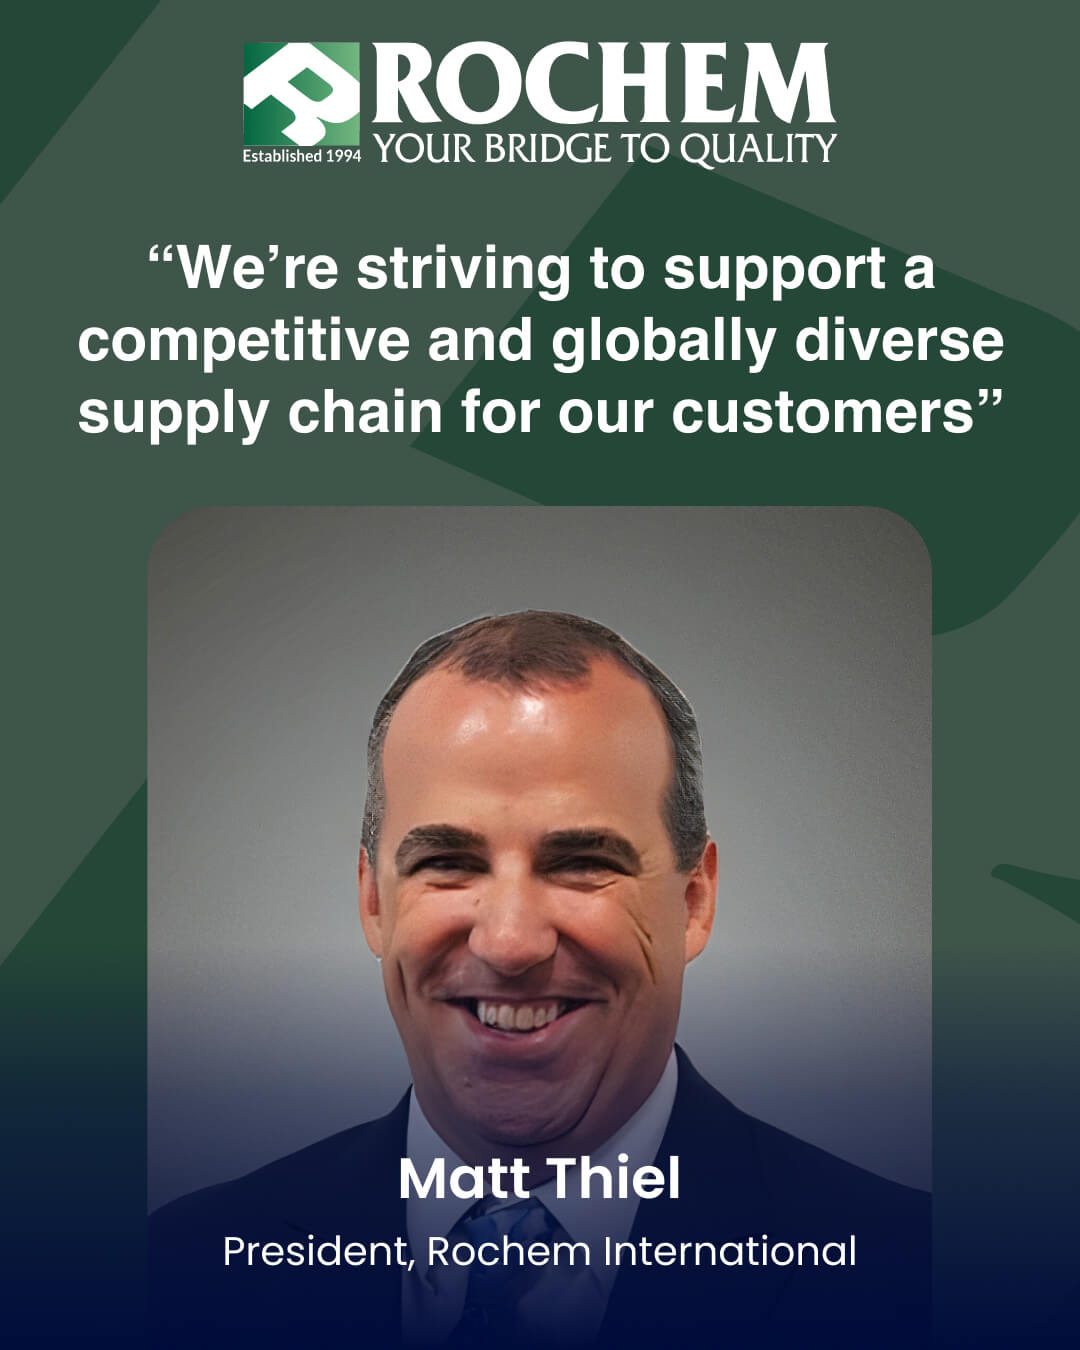 “We’re striving to support a competitive and globally diverse supply chain for our customers”